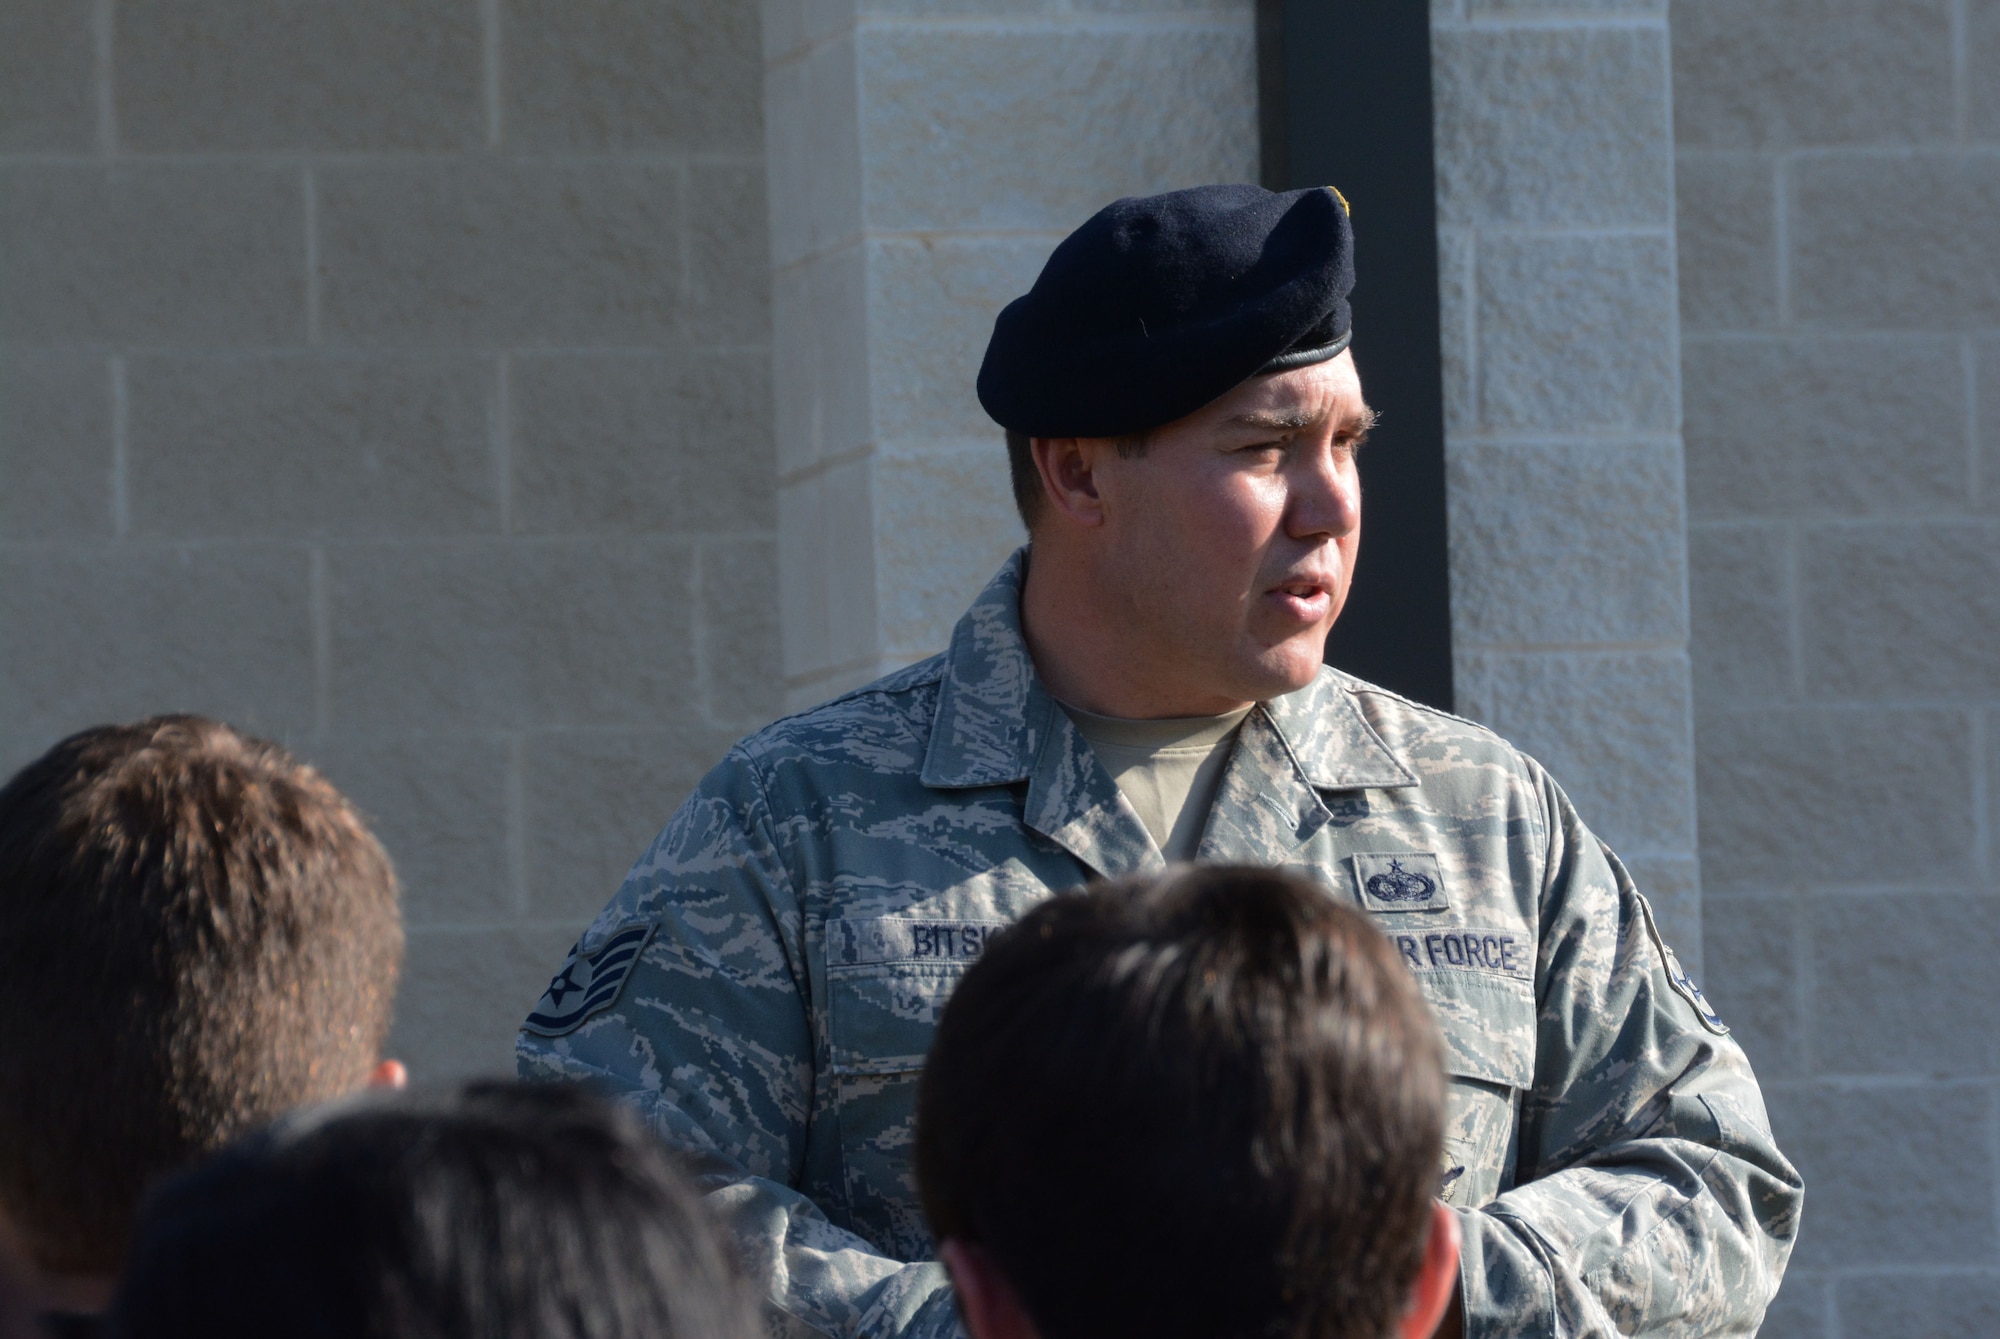 Staff Sgt. Stephen M. Bitsko, 610th Security Forces Squadron instructor, briefs students from Madison, Mississippi, May 29, 2014, Naval Air Station Fort Worth Joint Reserve Base, Texas. Members of the Junior Reserve Officer Training Corps, Madison Central High School, visit the 301st Fighter Wing to learn about the different career fields the Air Force has to offer. (U.S. Air Force photo by Staff Sgt. Samantha A. Mathison)